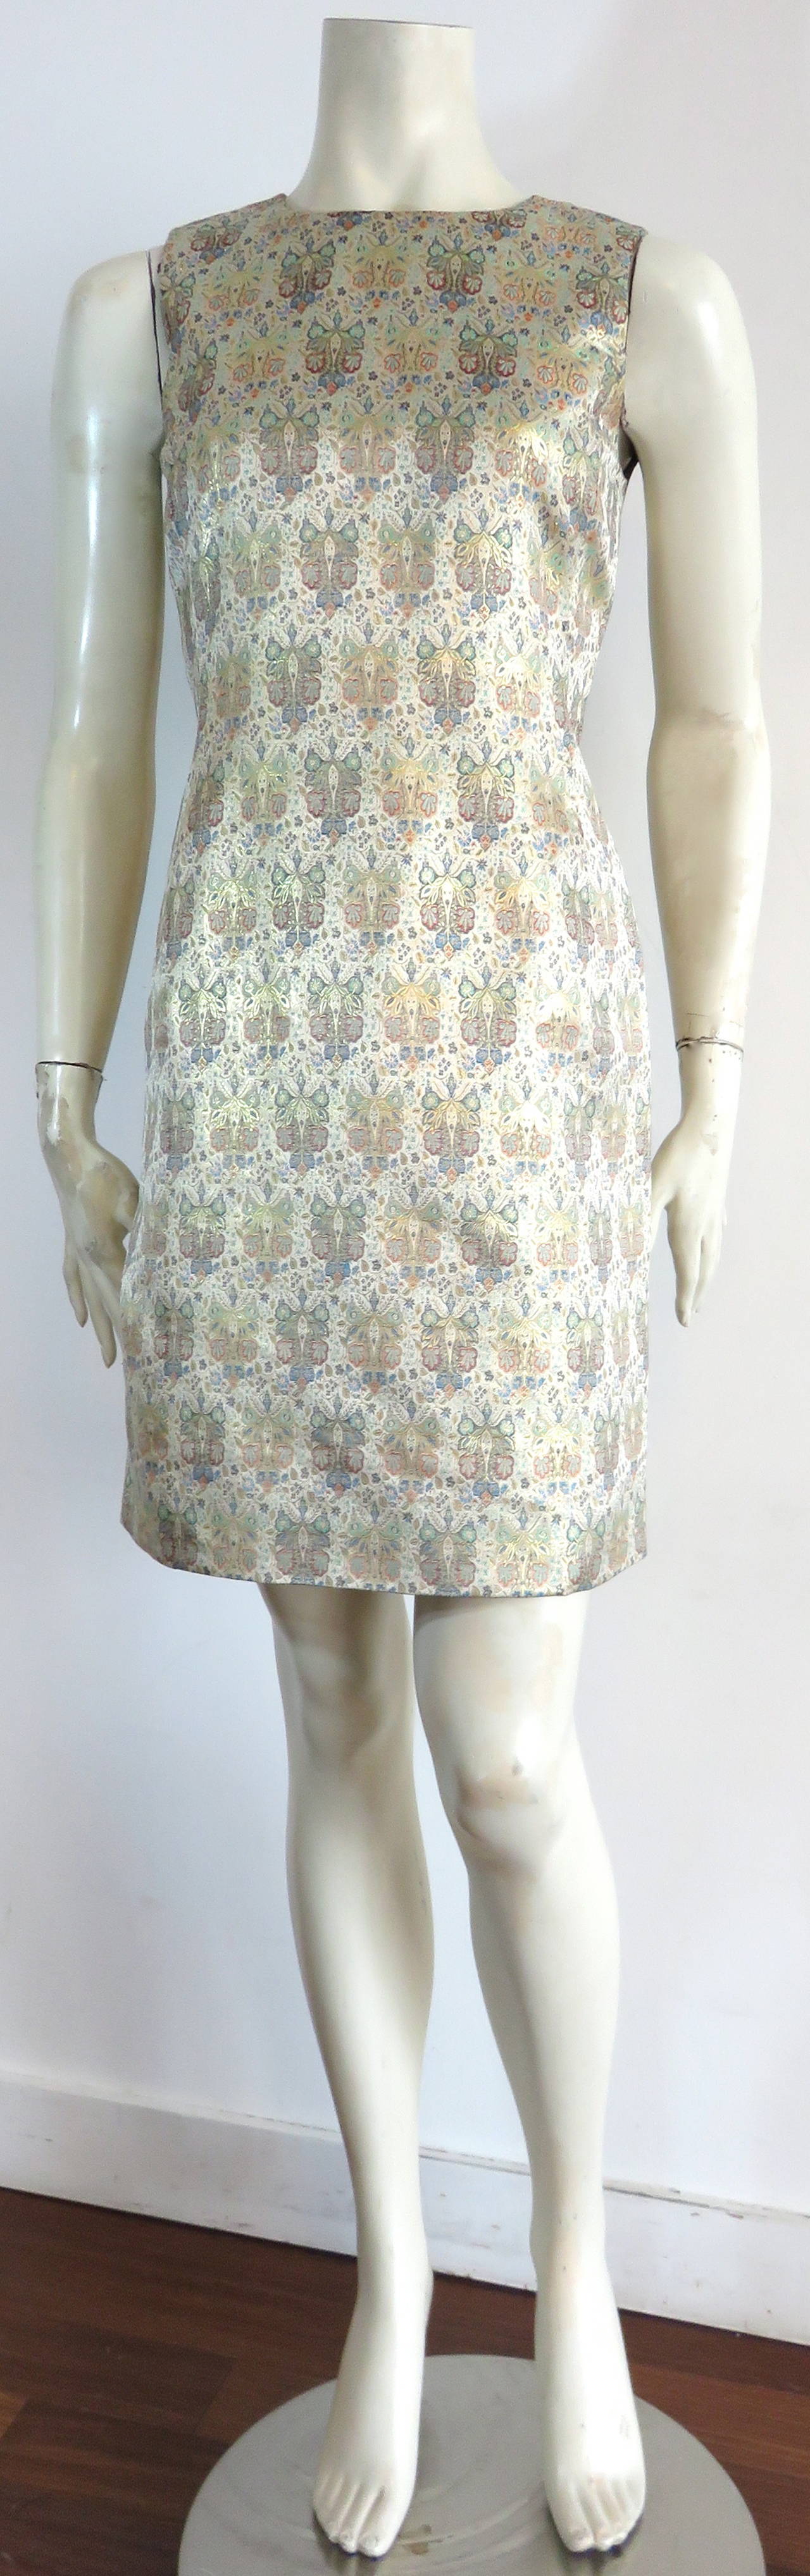 Excellent condition, 1990's OSCAR DE LA RENTA 100% silk, brocade tapestry weave dress.

This stunning dress features a gorgeous, floral tapestry brocade fabric accented with metallic gold fibers.  

Intricate fabric design with many fine,